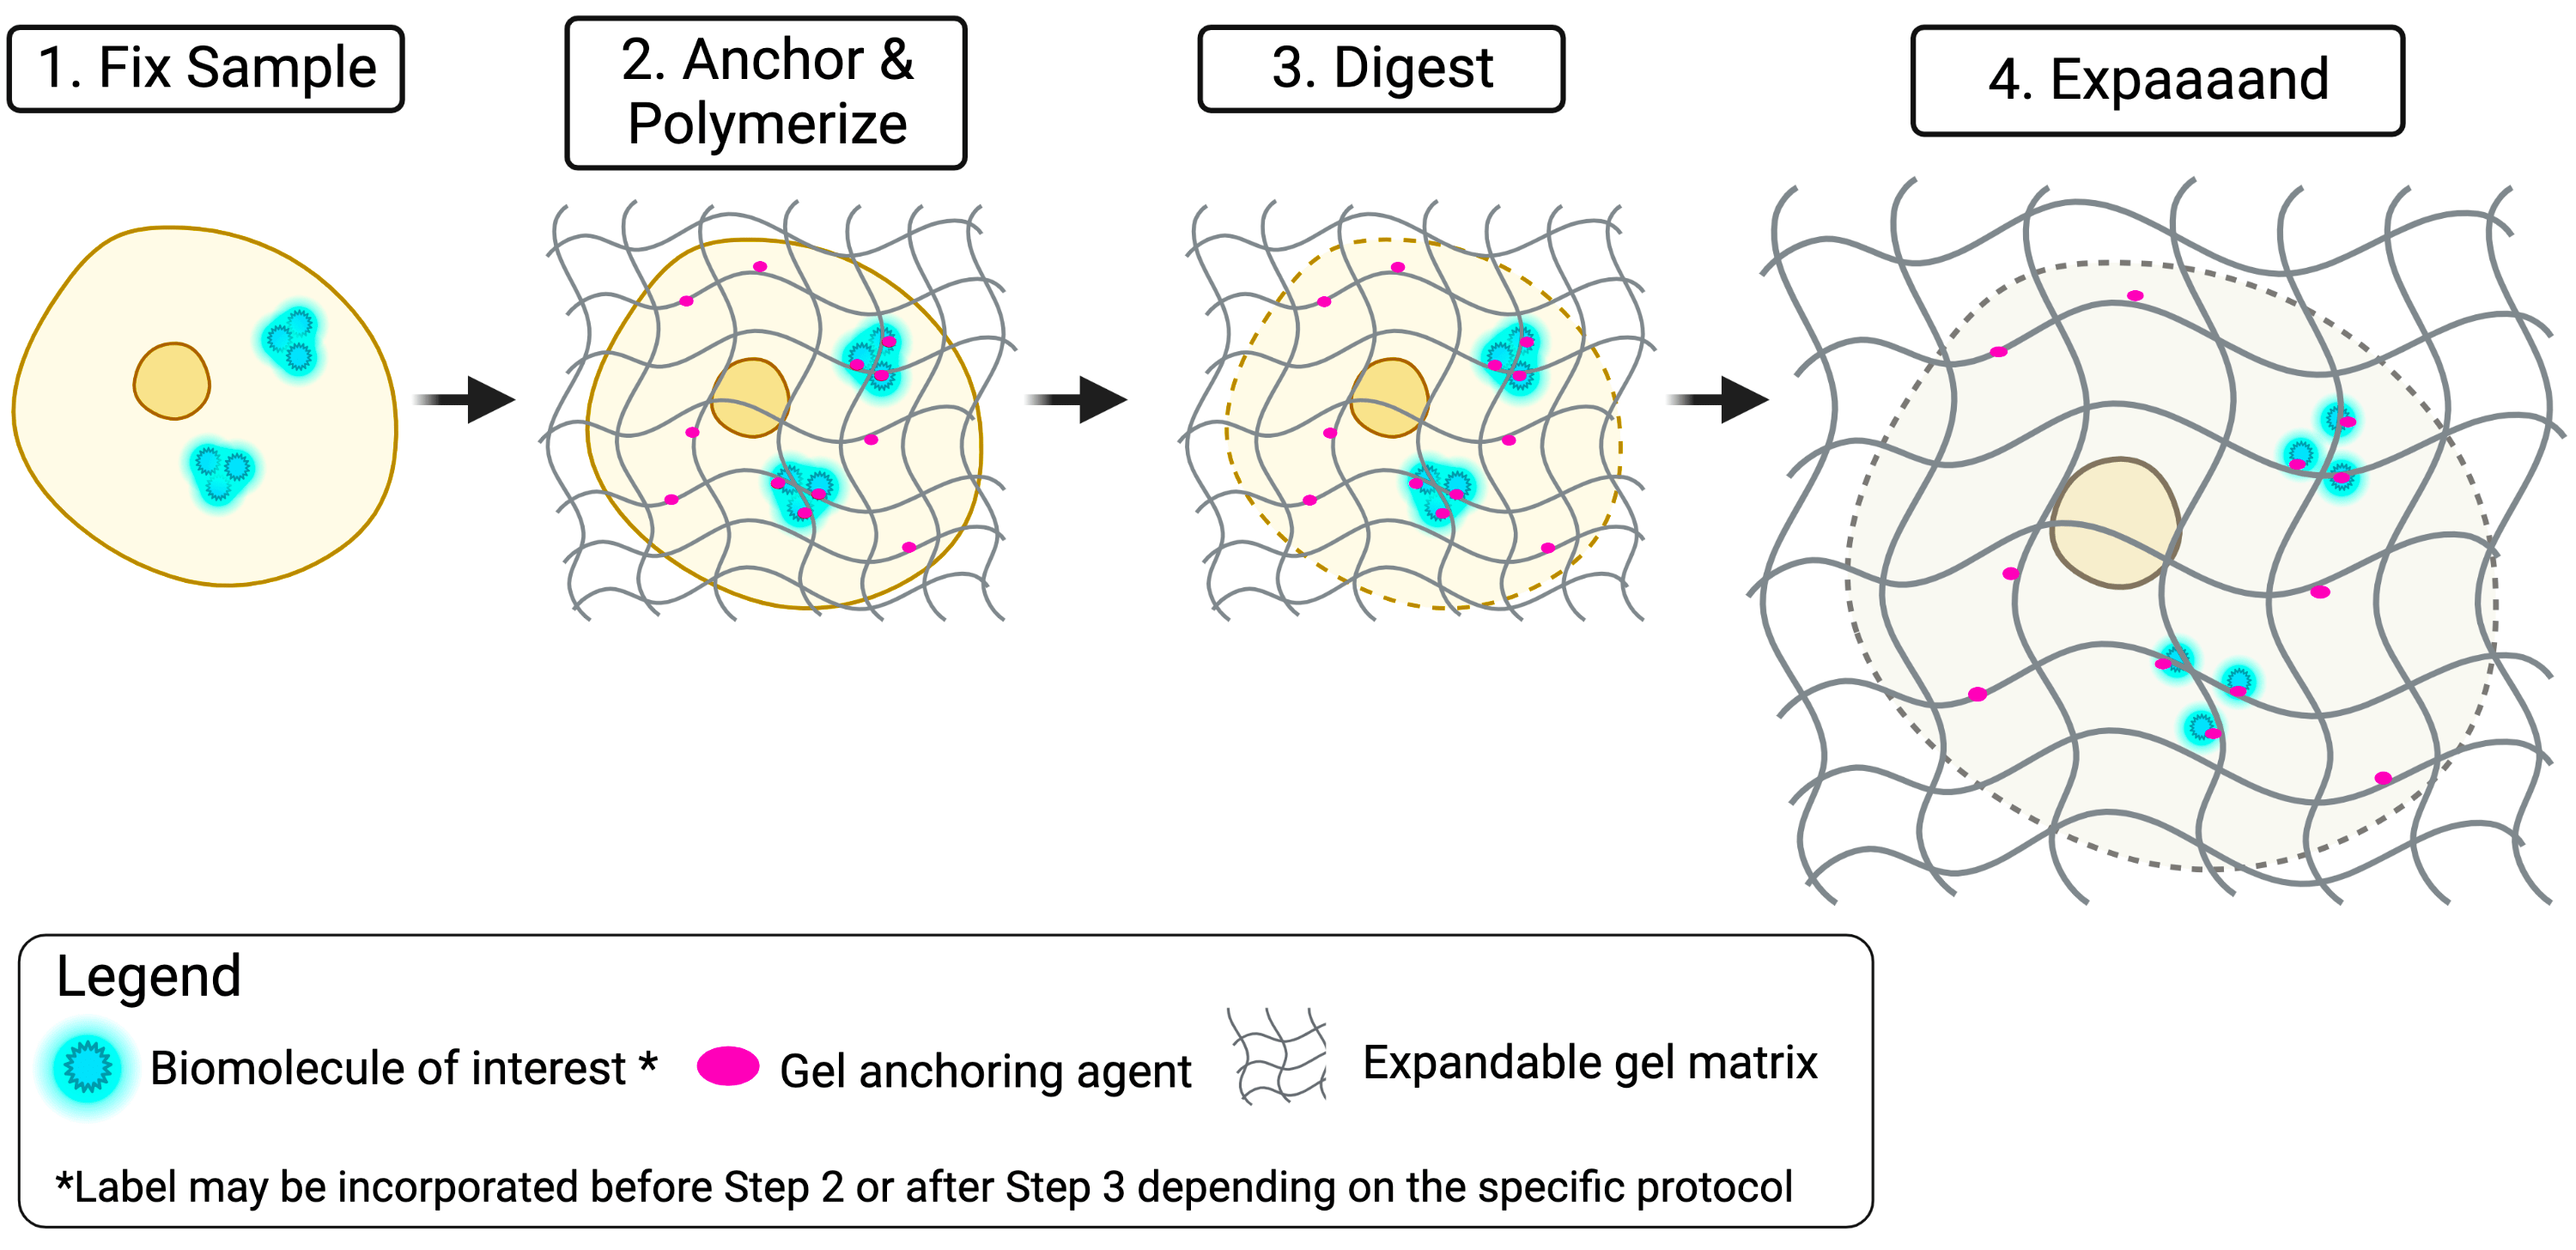 Graphic showing the four steps (fix sample, anchor and polymerize, digest, expand) of expansion microscopy